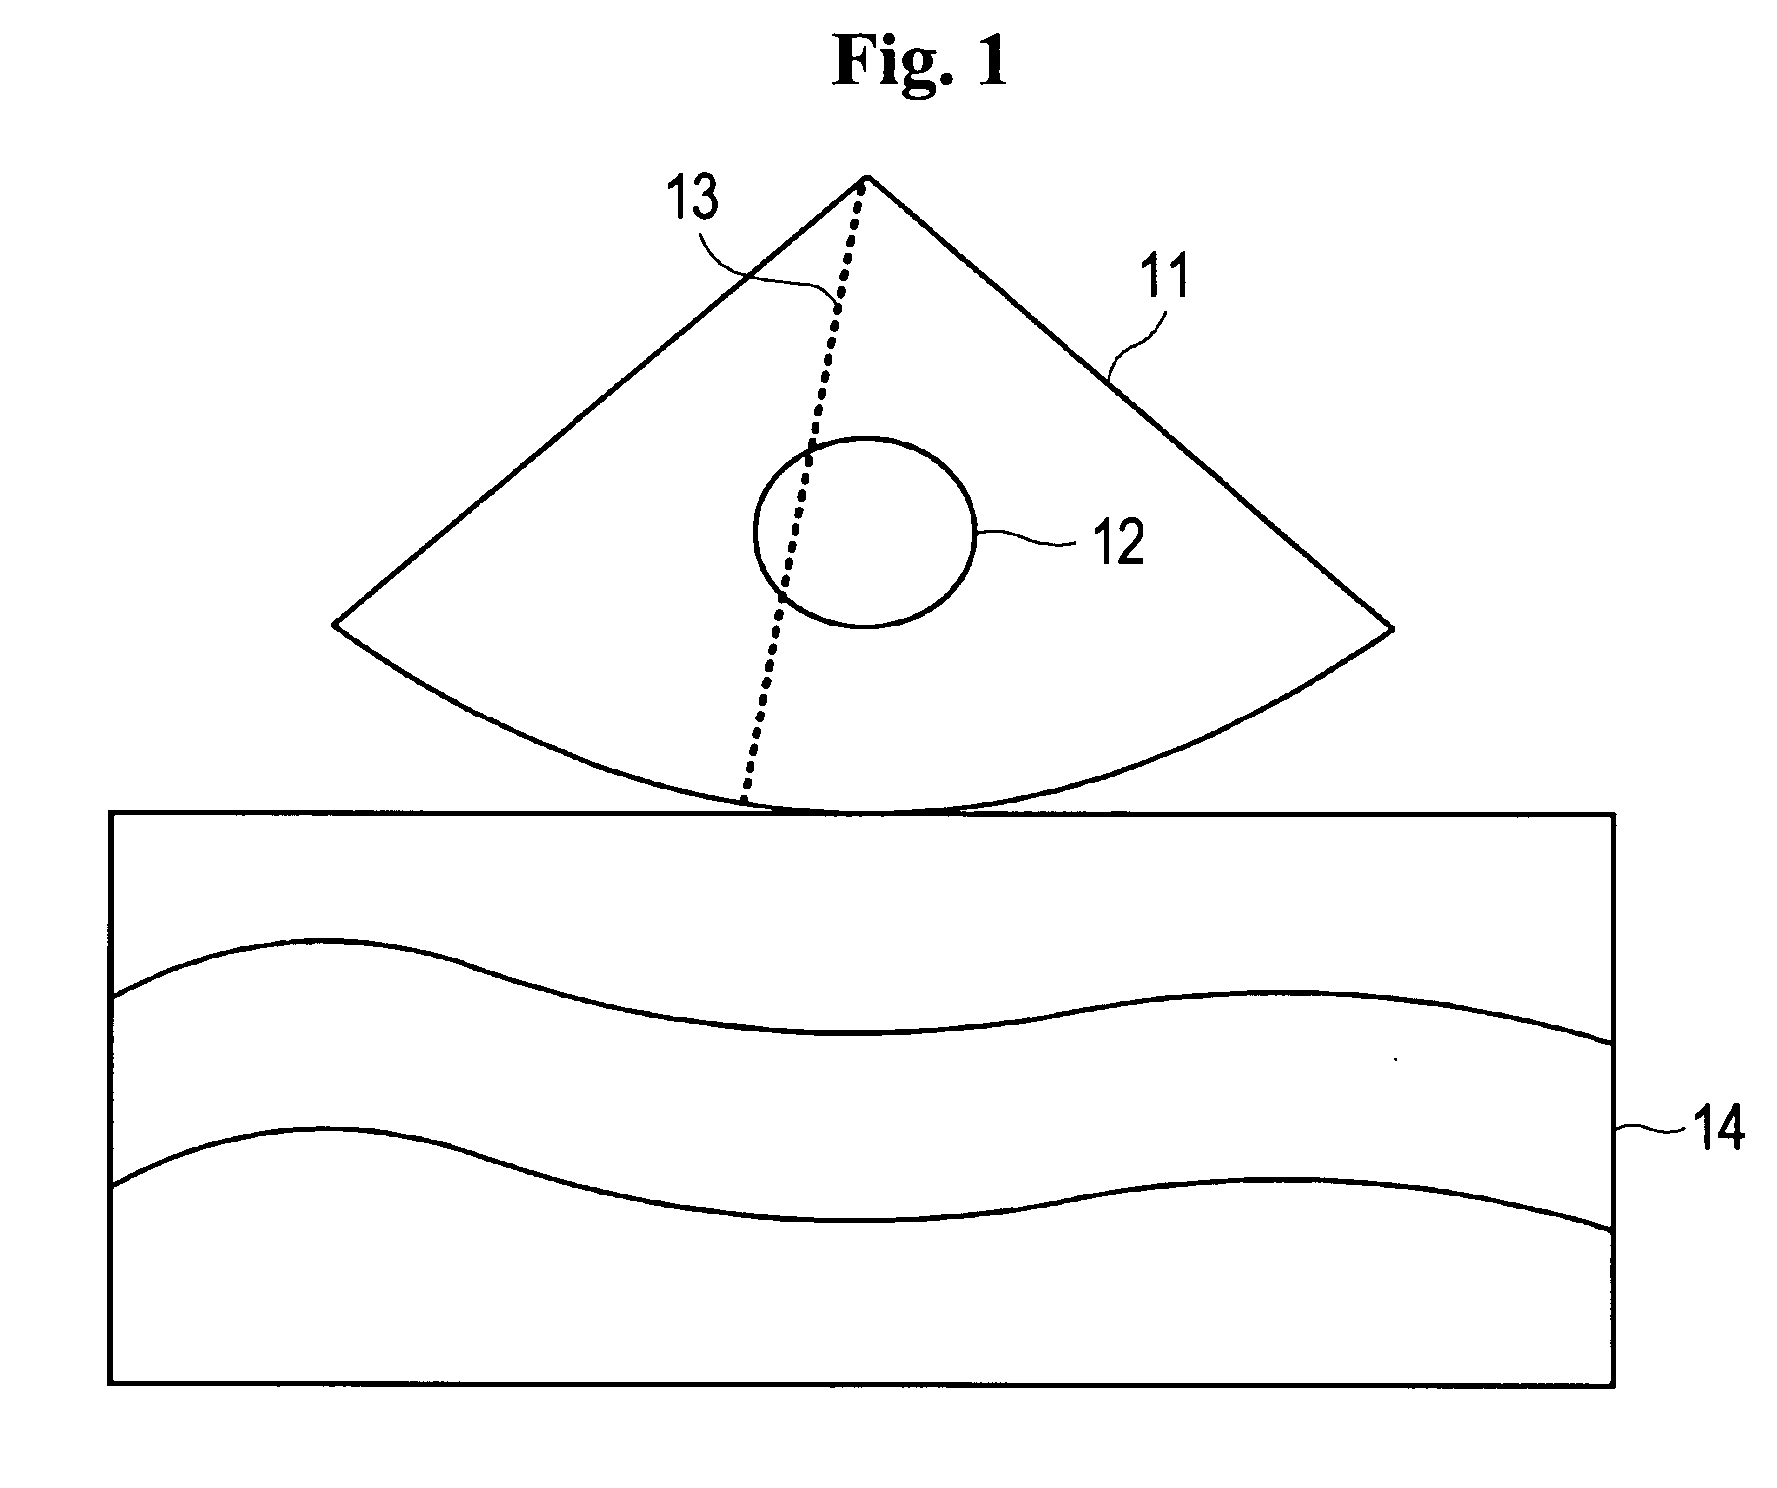 Ultrasound diagnostic system and method of forming arbitrary M-mode images